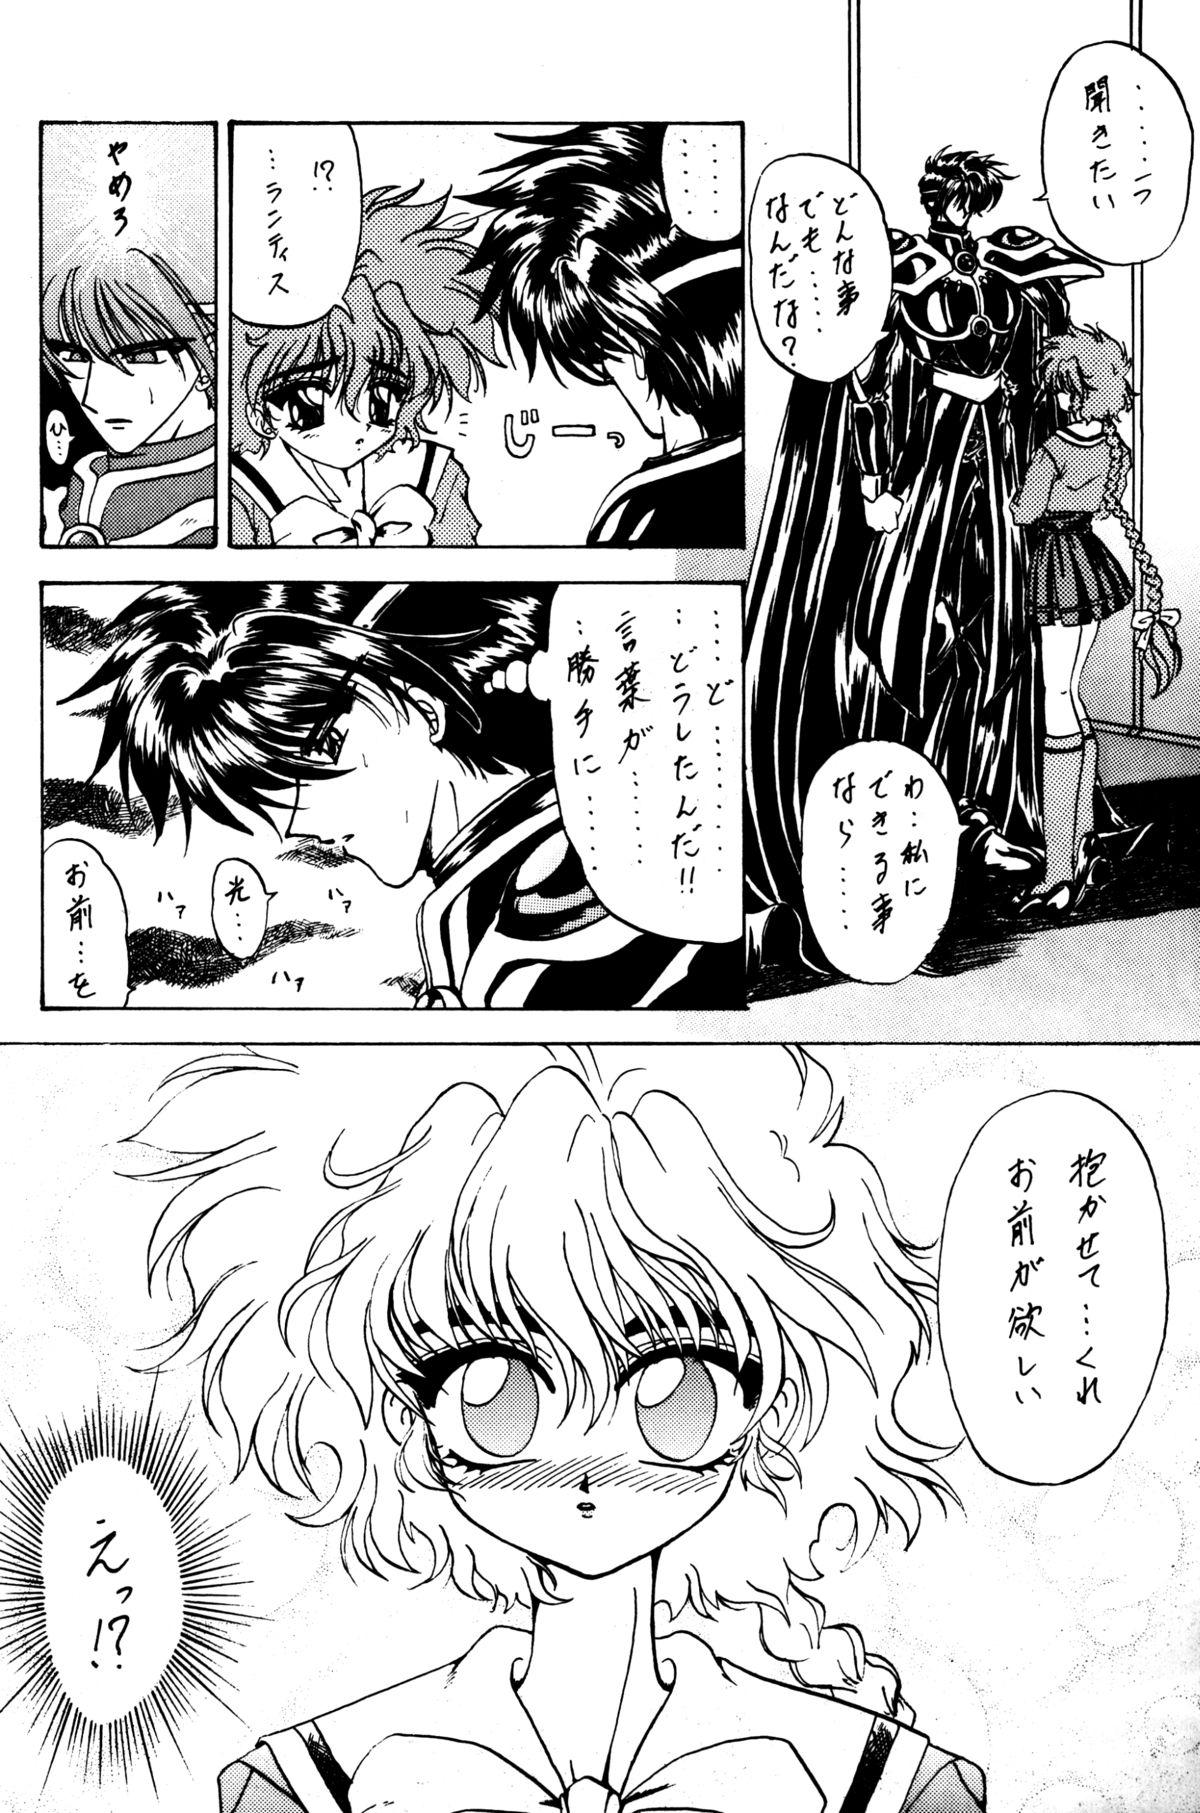 Exotic Stale World II - Magic knight rayearth Tight Pussy - Page 7